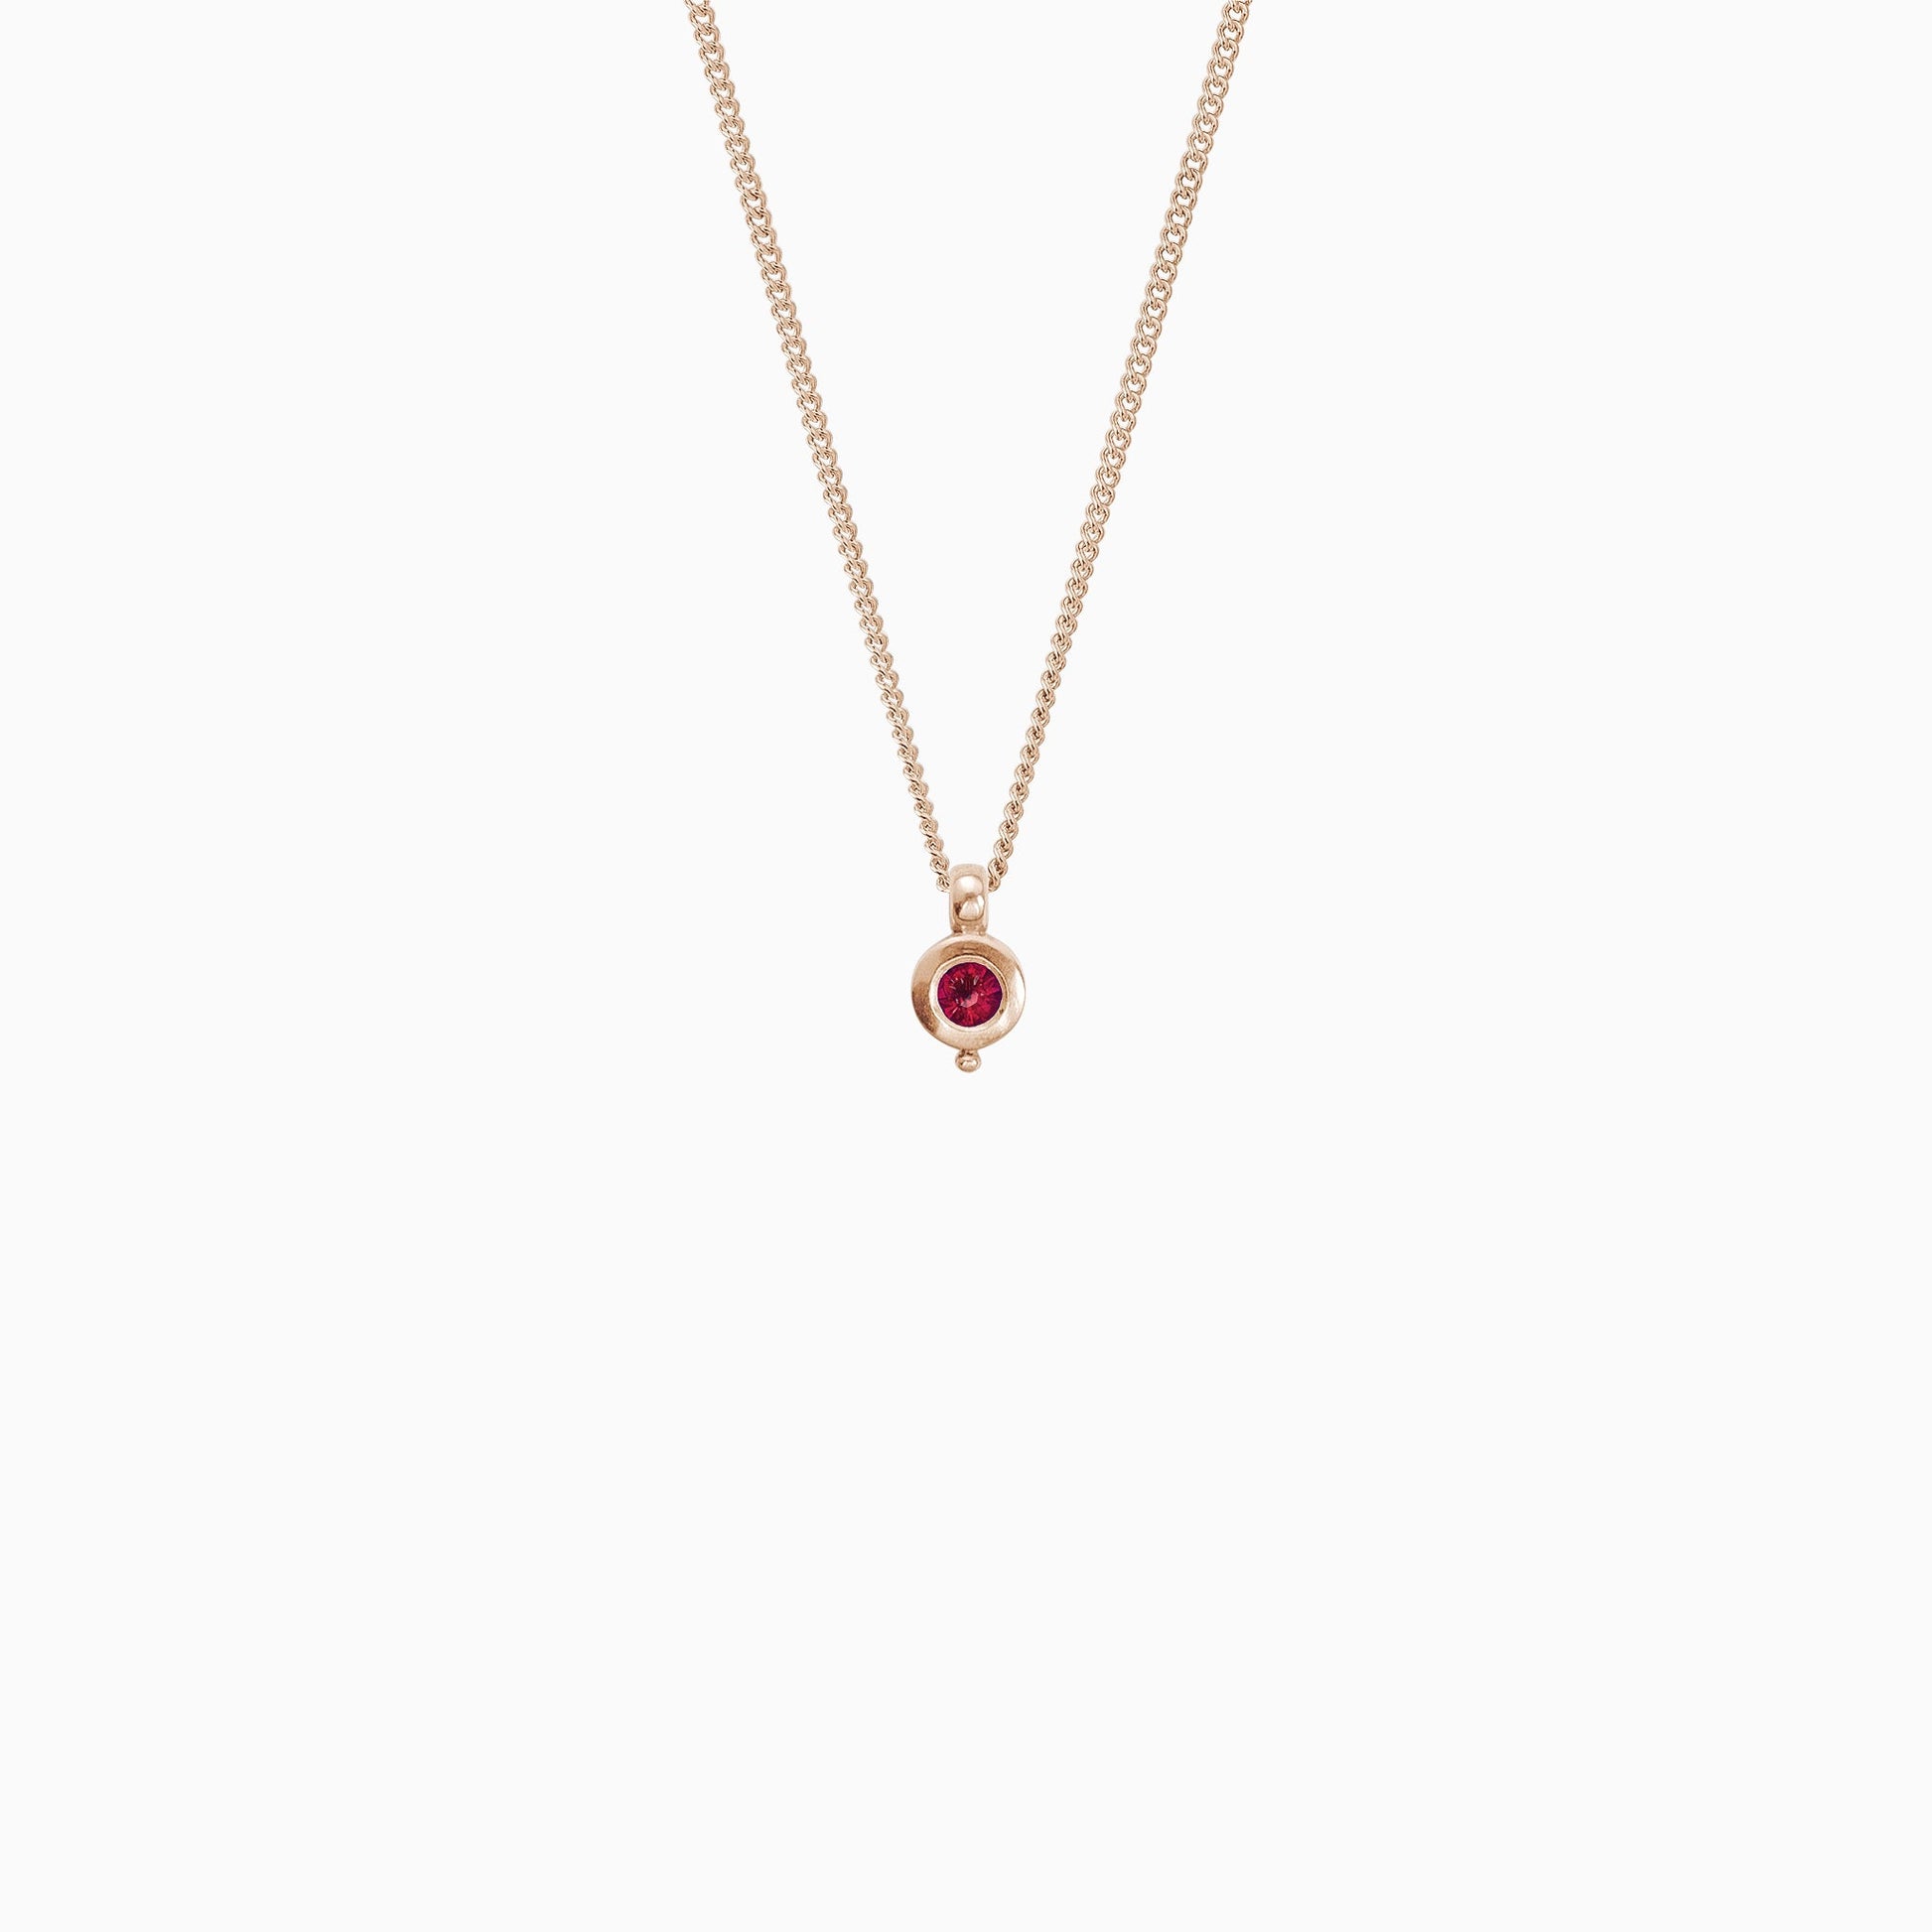 18ct Fairtrade rose gold round pendant 12mm  x 7mm with small round bead attached below on a 45cm fine curb chain. Set with a 4mm round ruby.